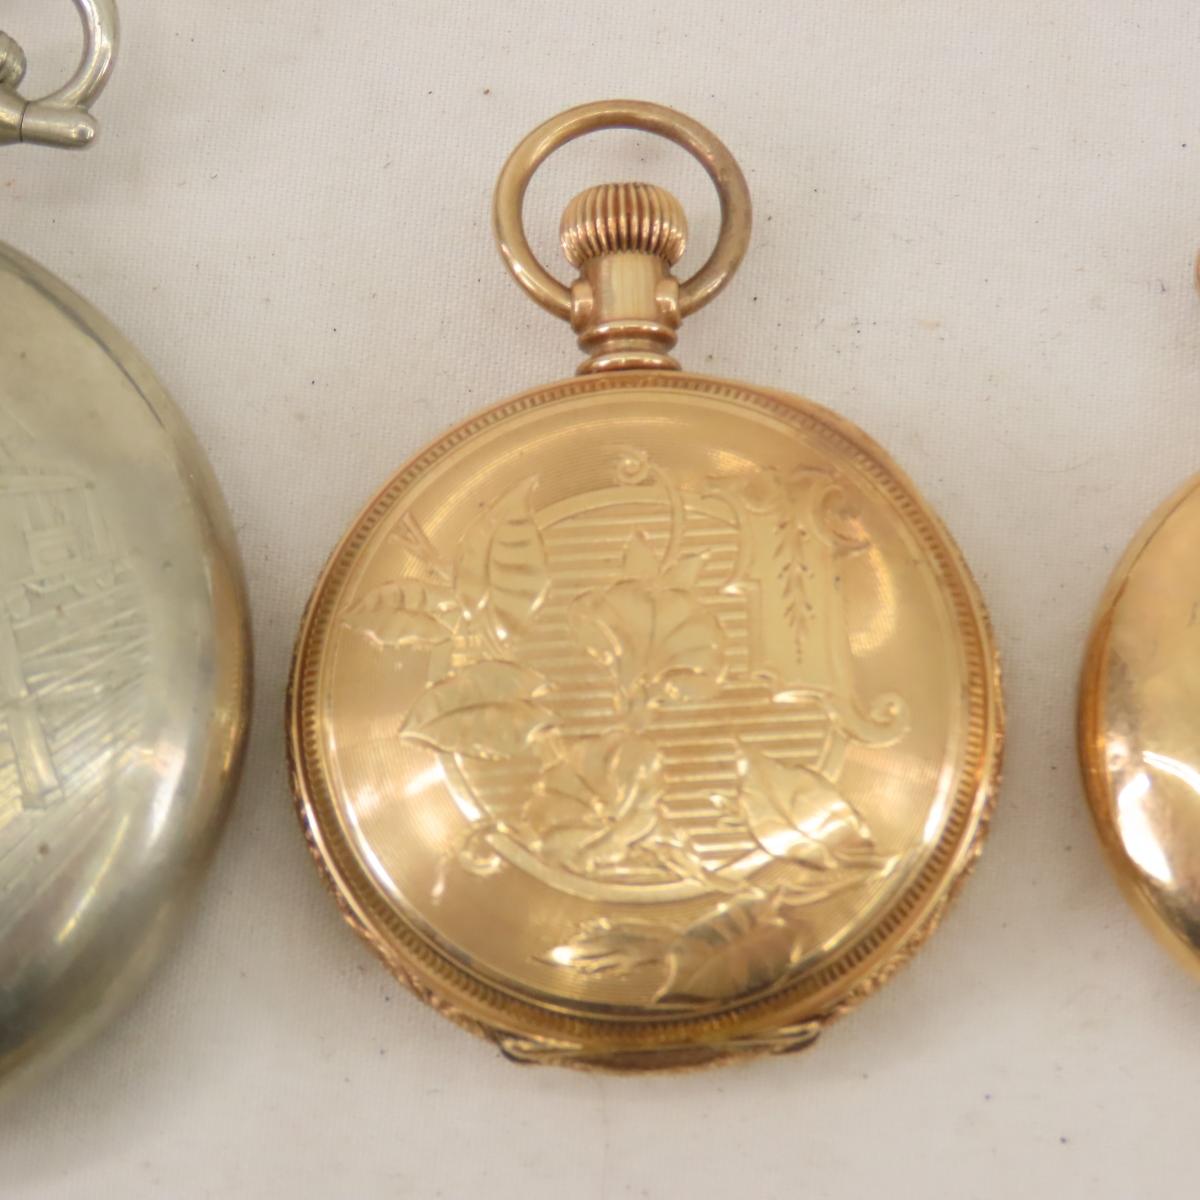 8 Assorted Pocket Watches for Repair